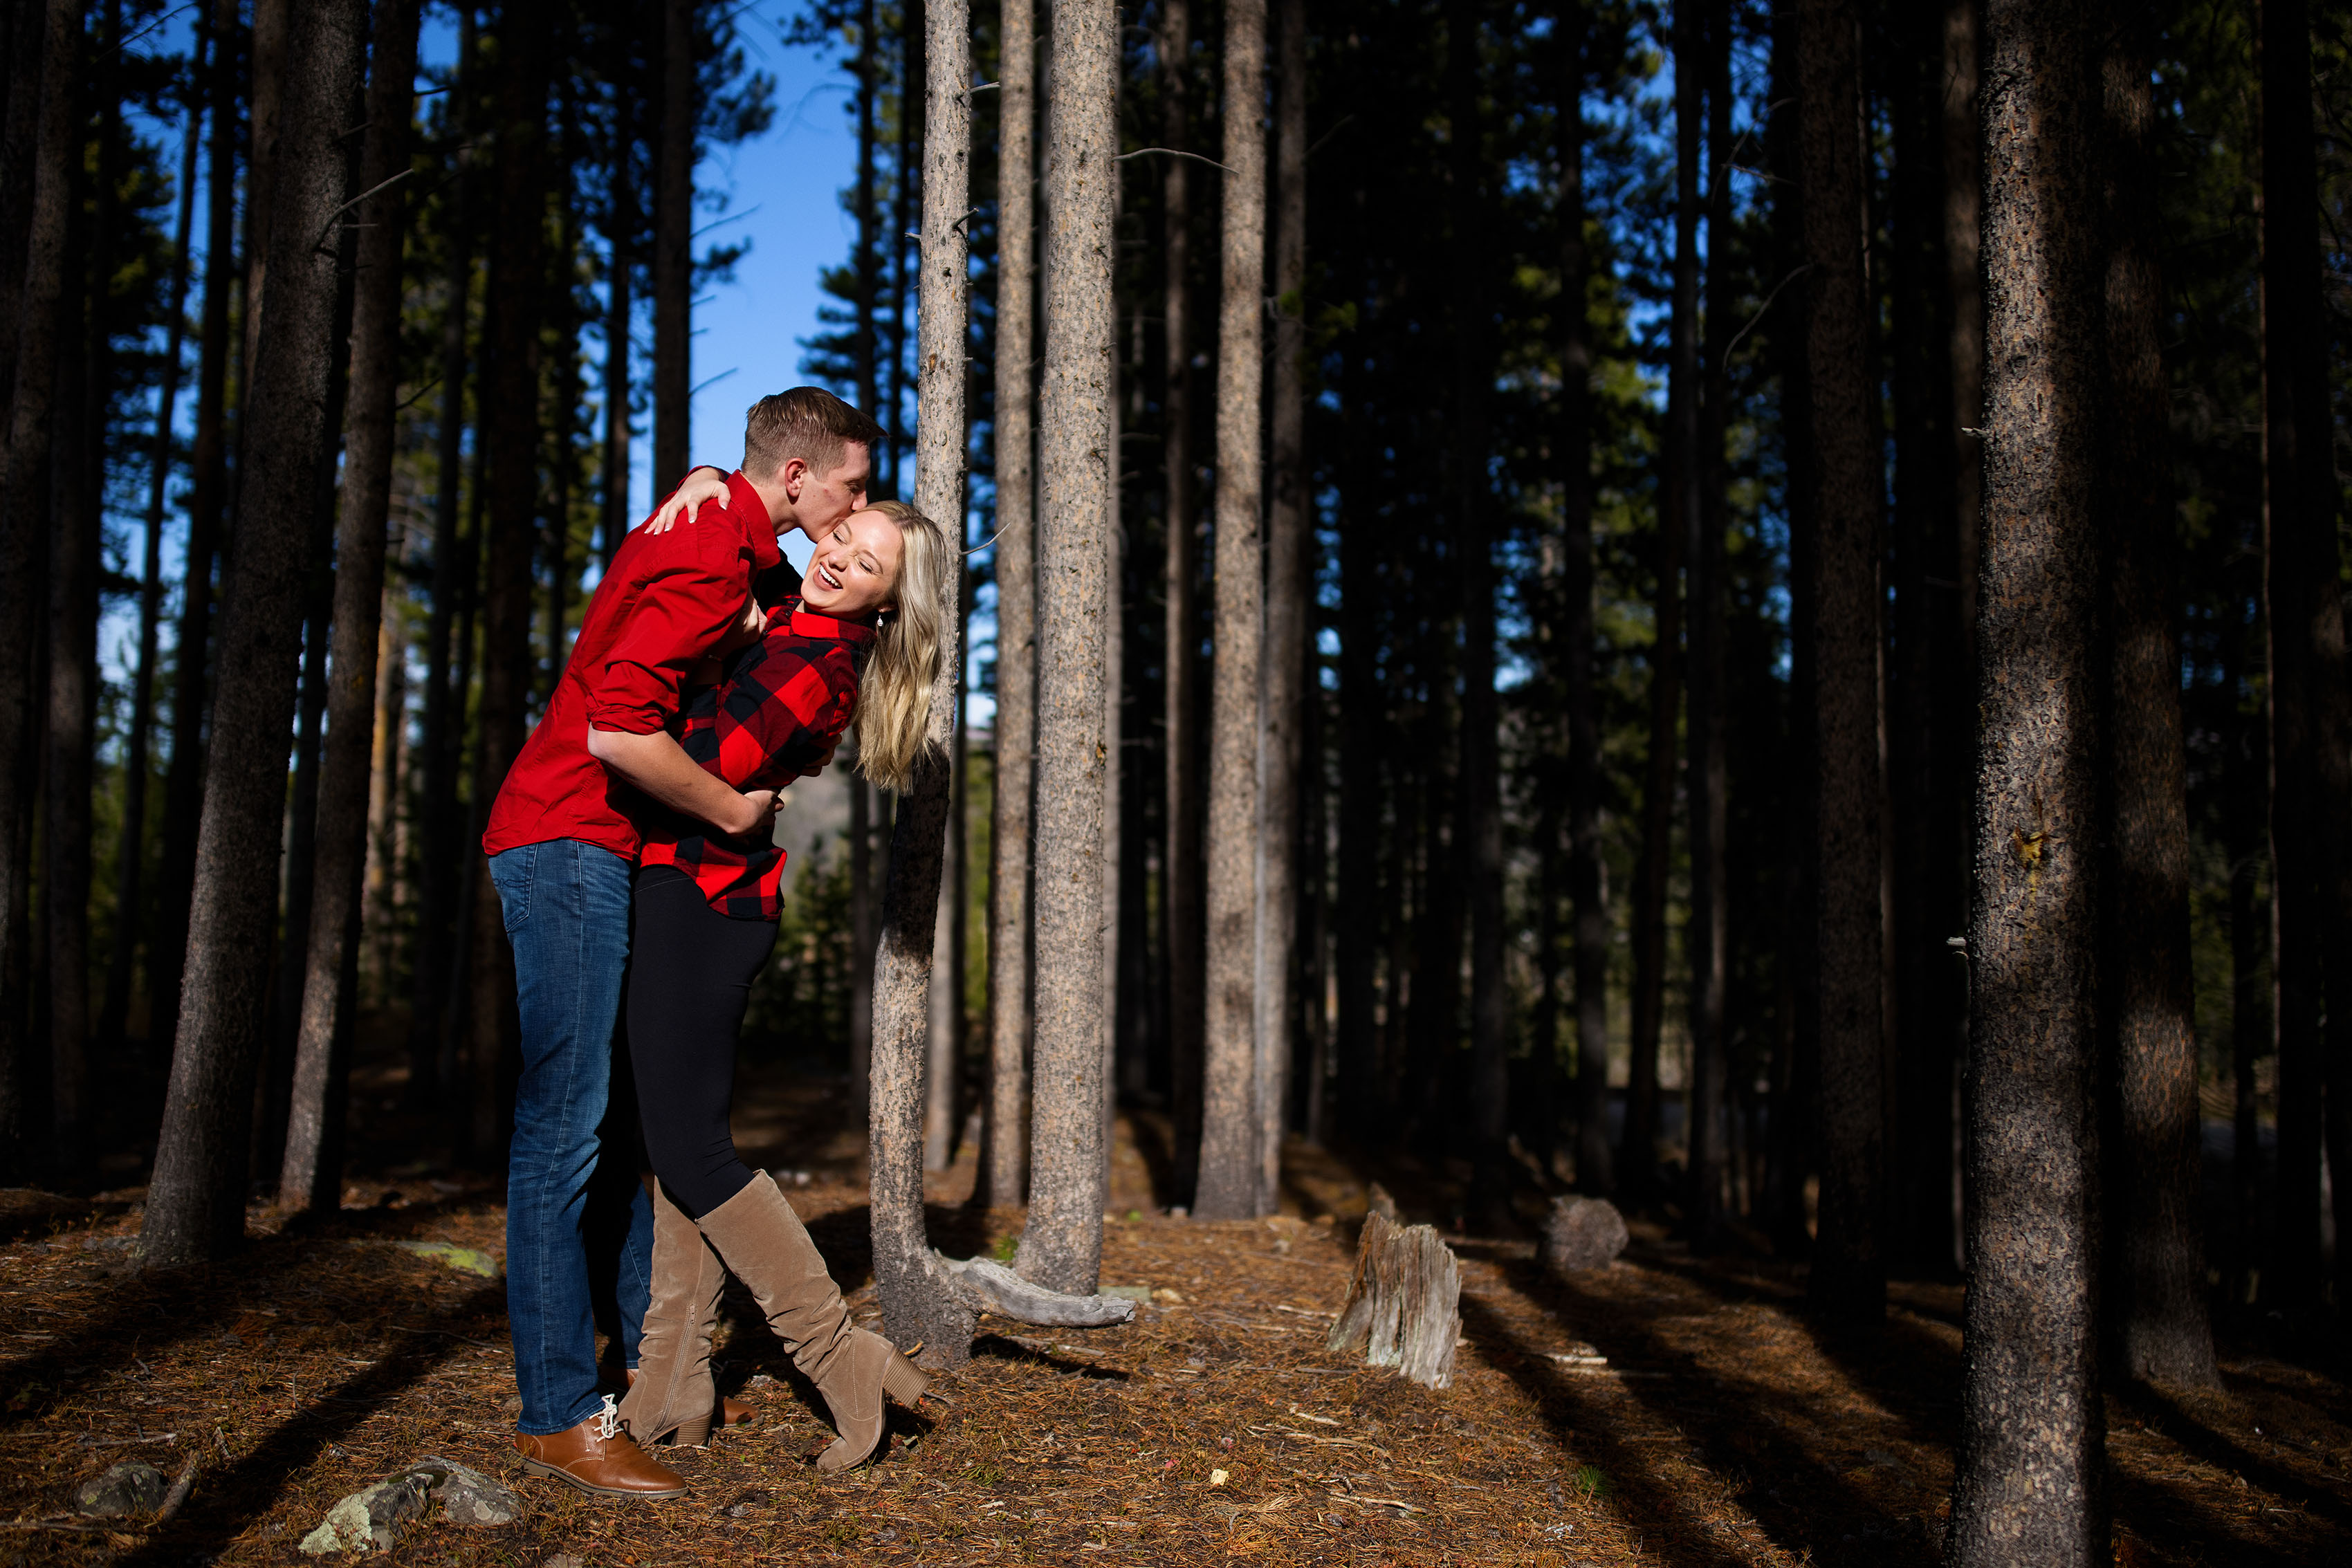 Joseph kisses Chloe in a grove of pine trees at Sawmill Reservoir